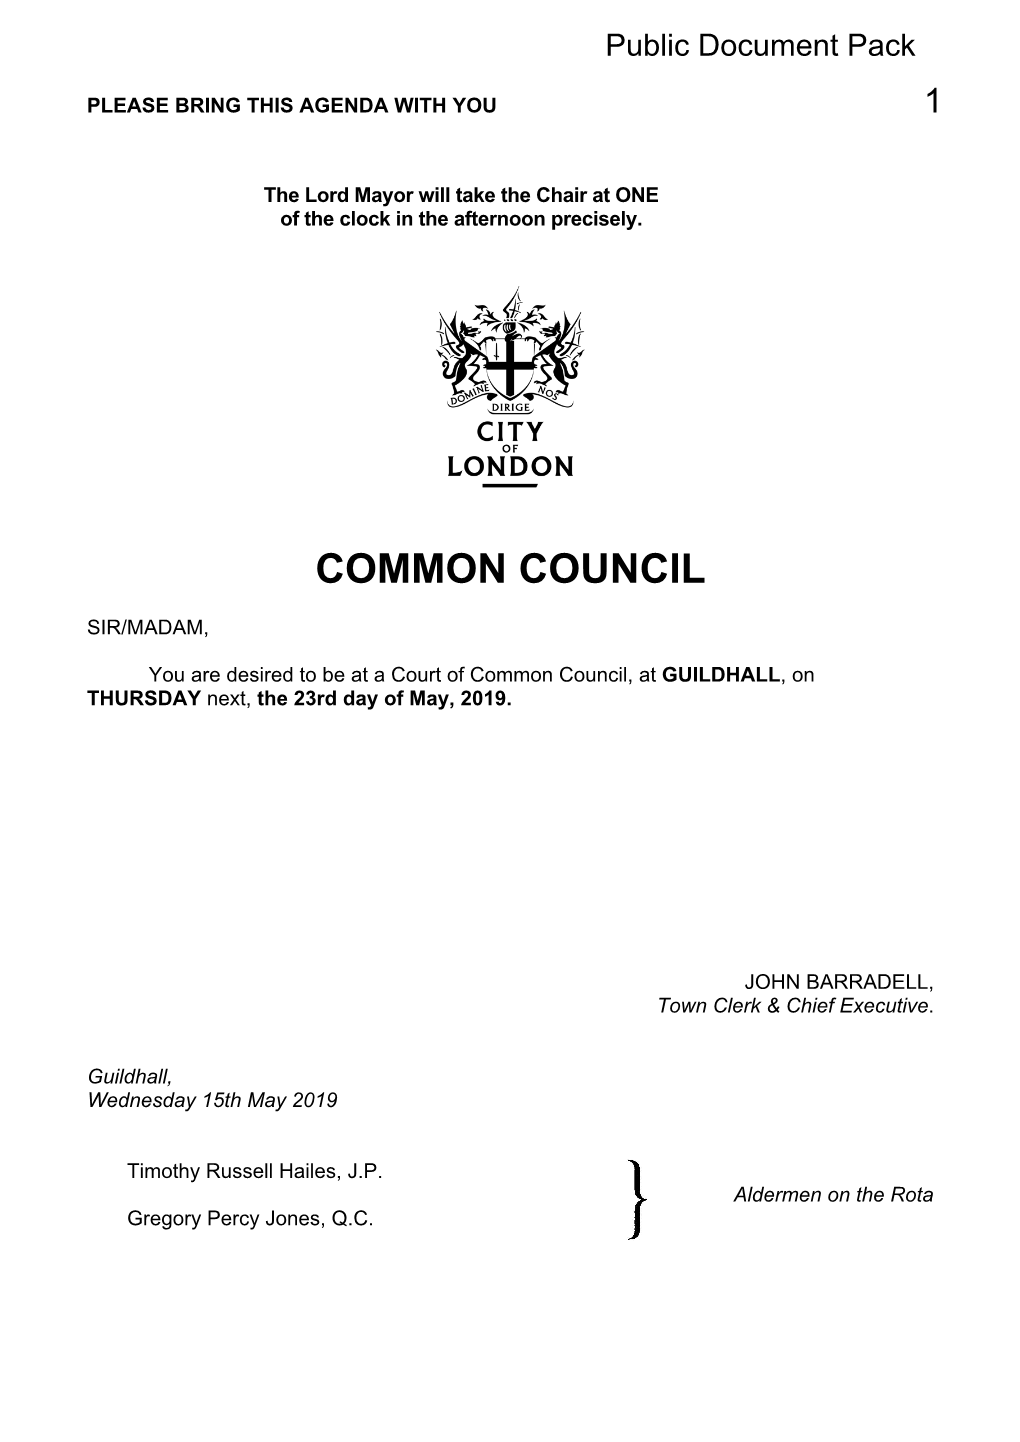 (Public Pack)Agenda Document for Court of Common Council, 23/05